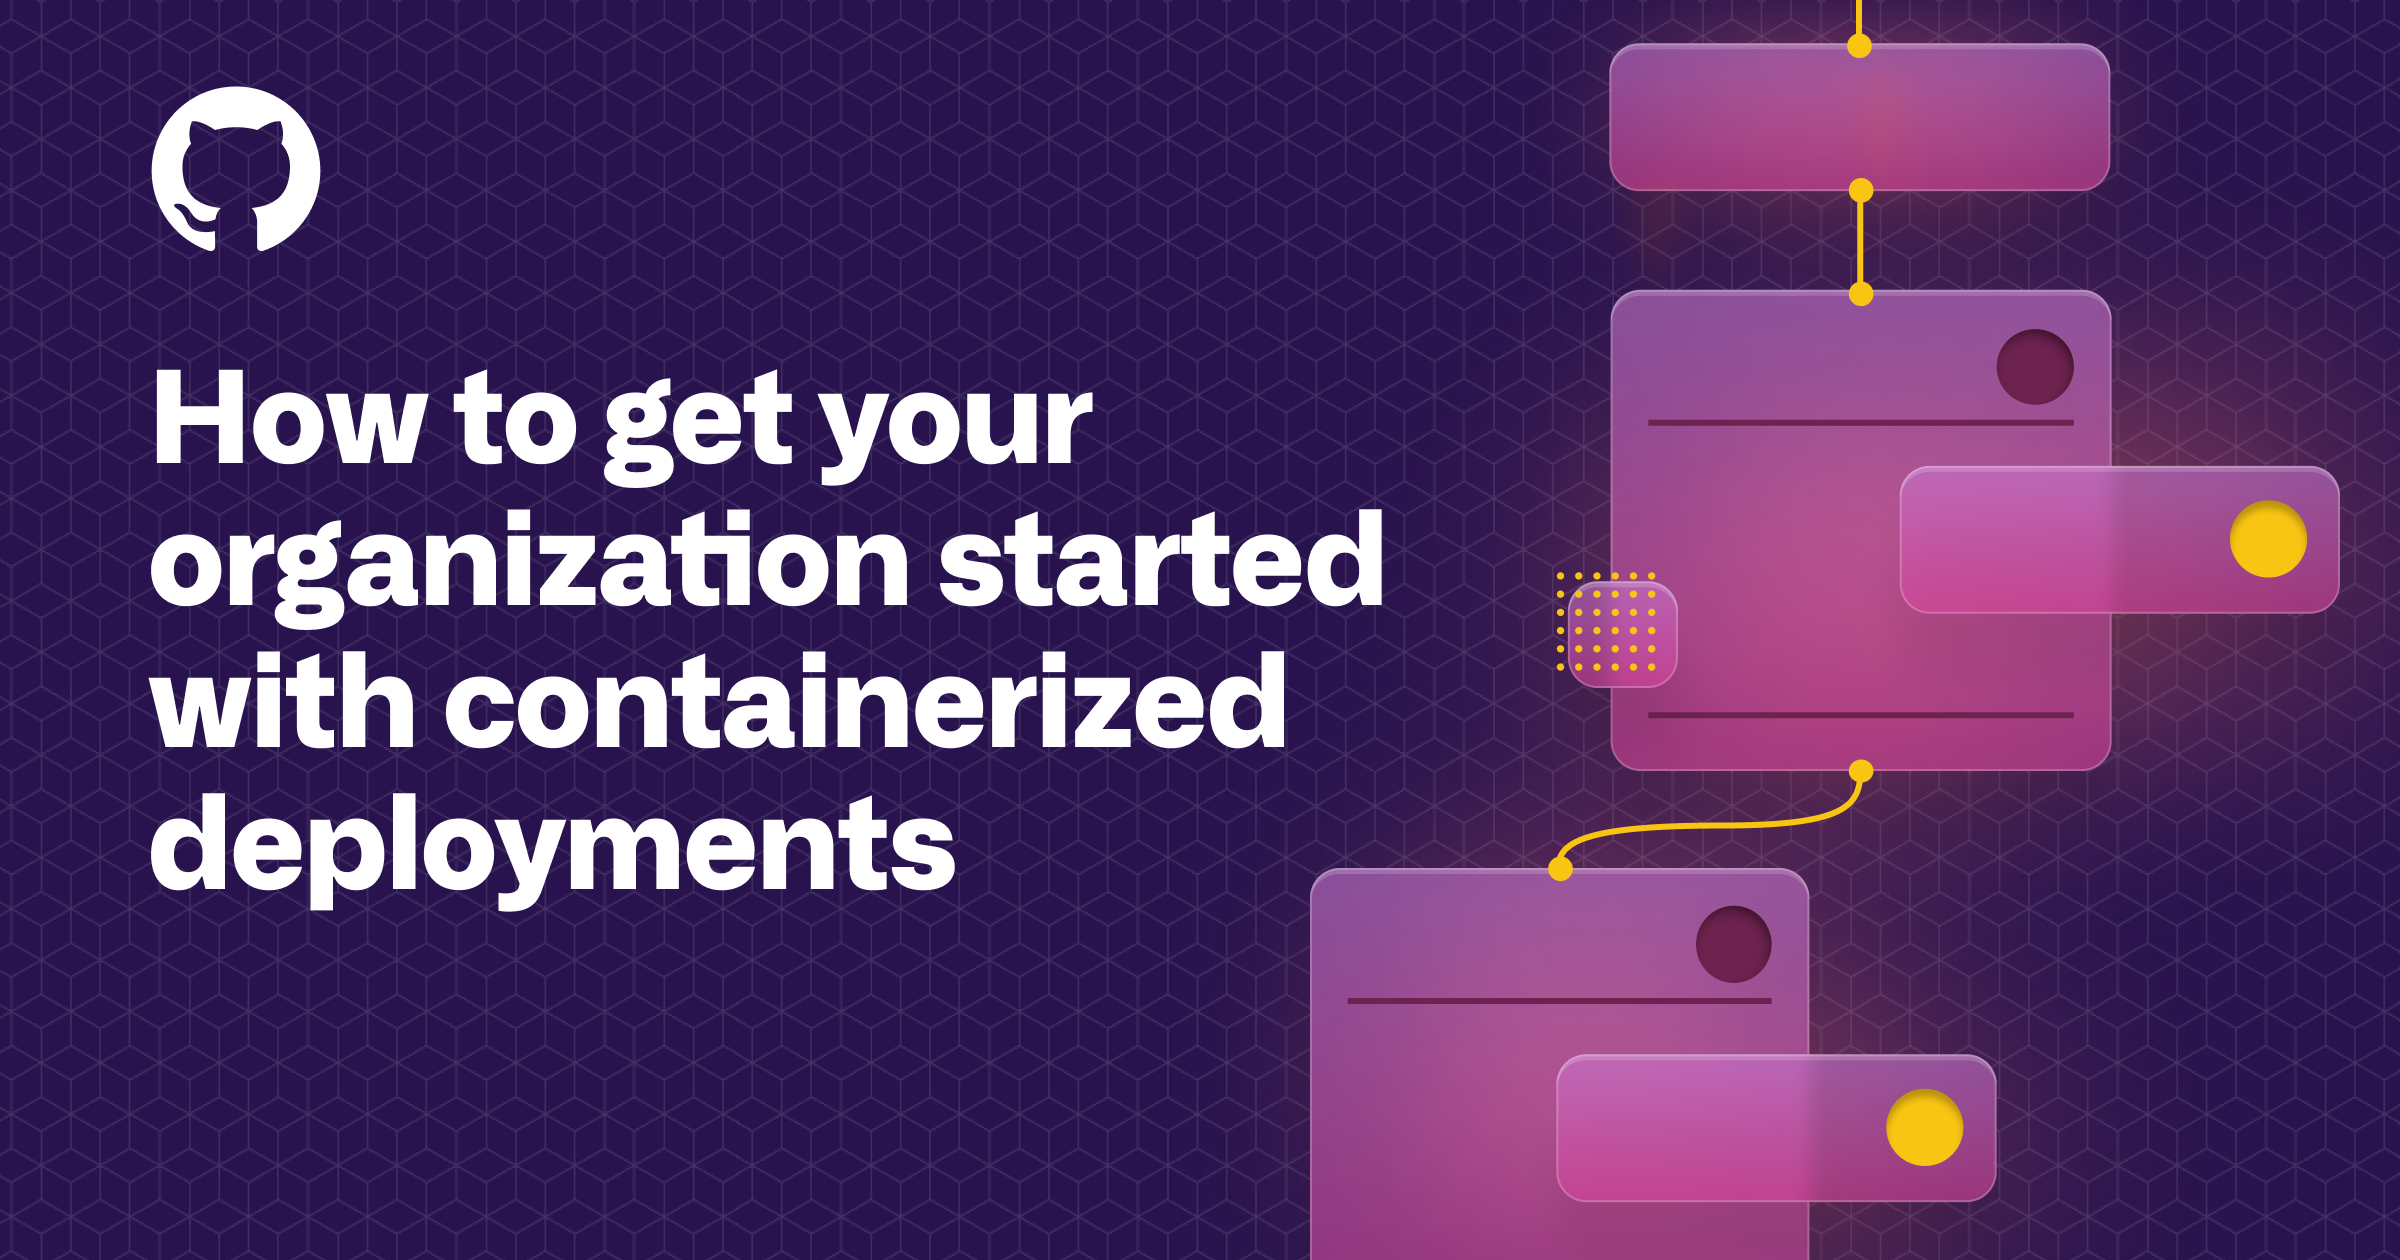 How to get your organization started with containerized deployments